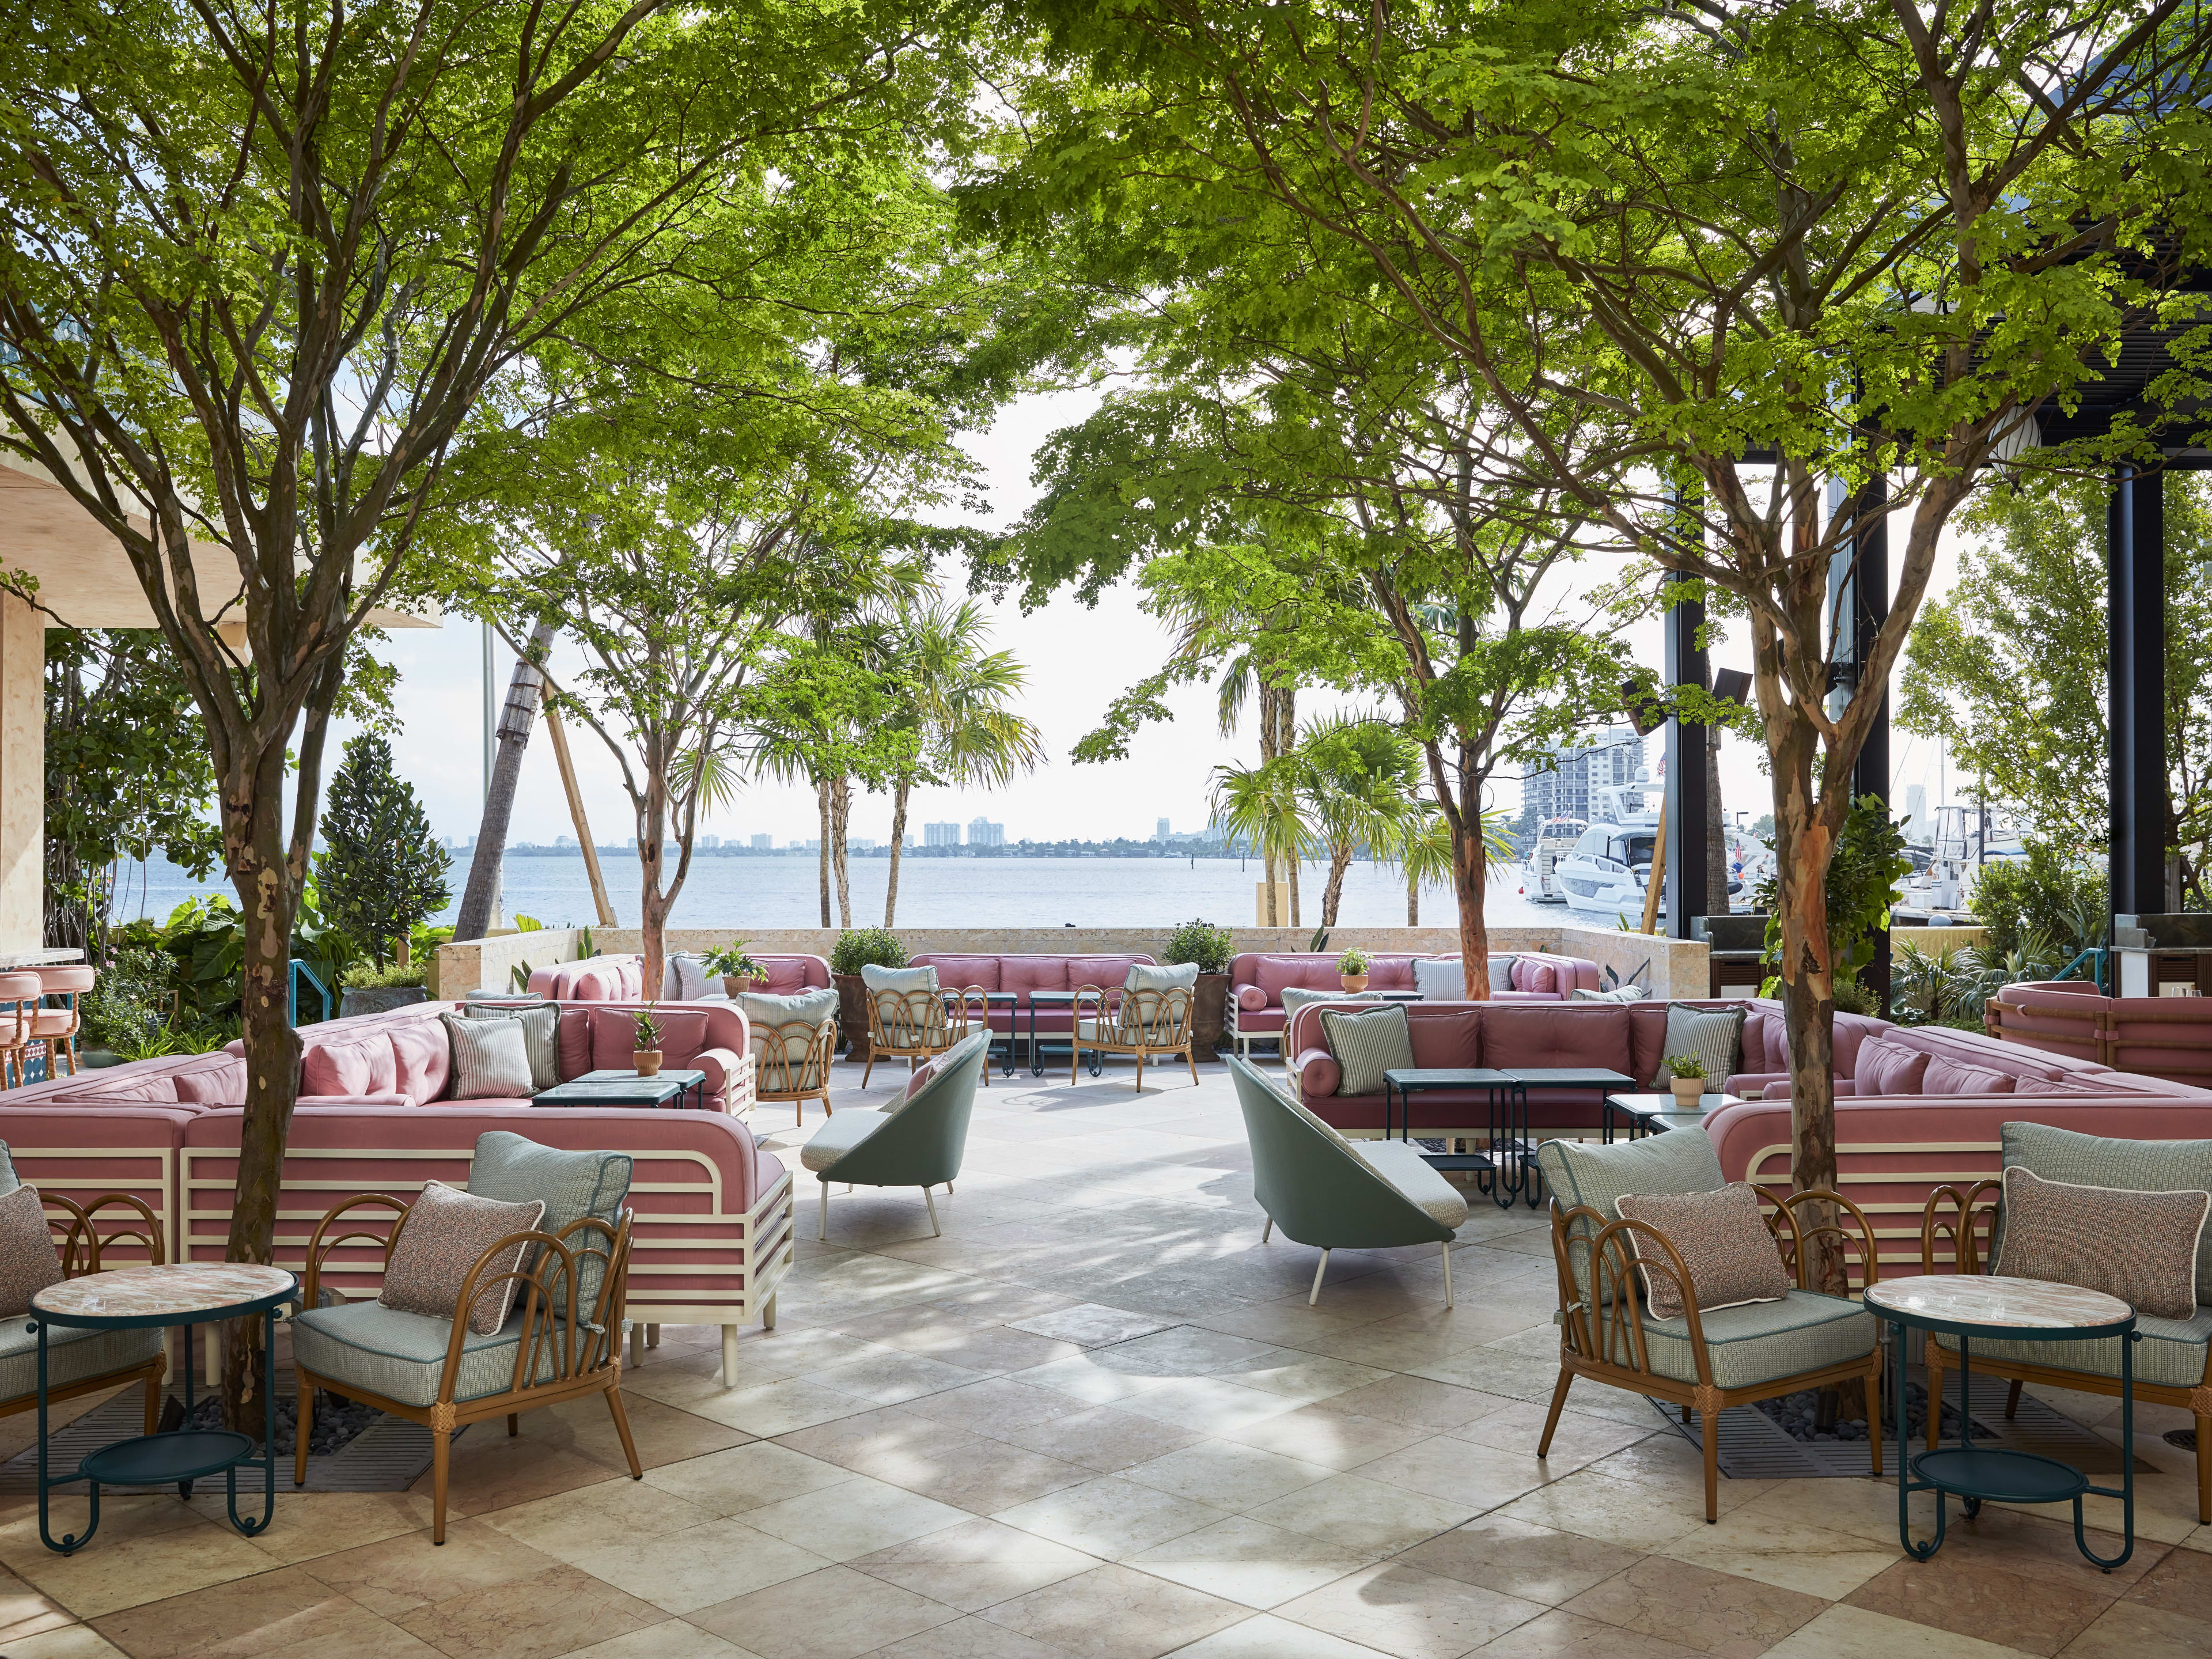 An outdoor patio with waterfront seating.